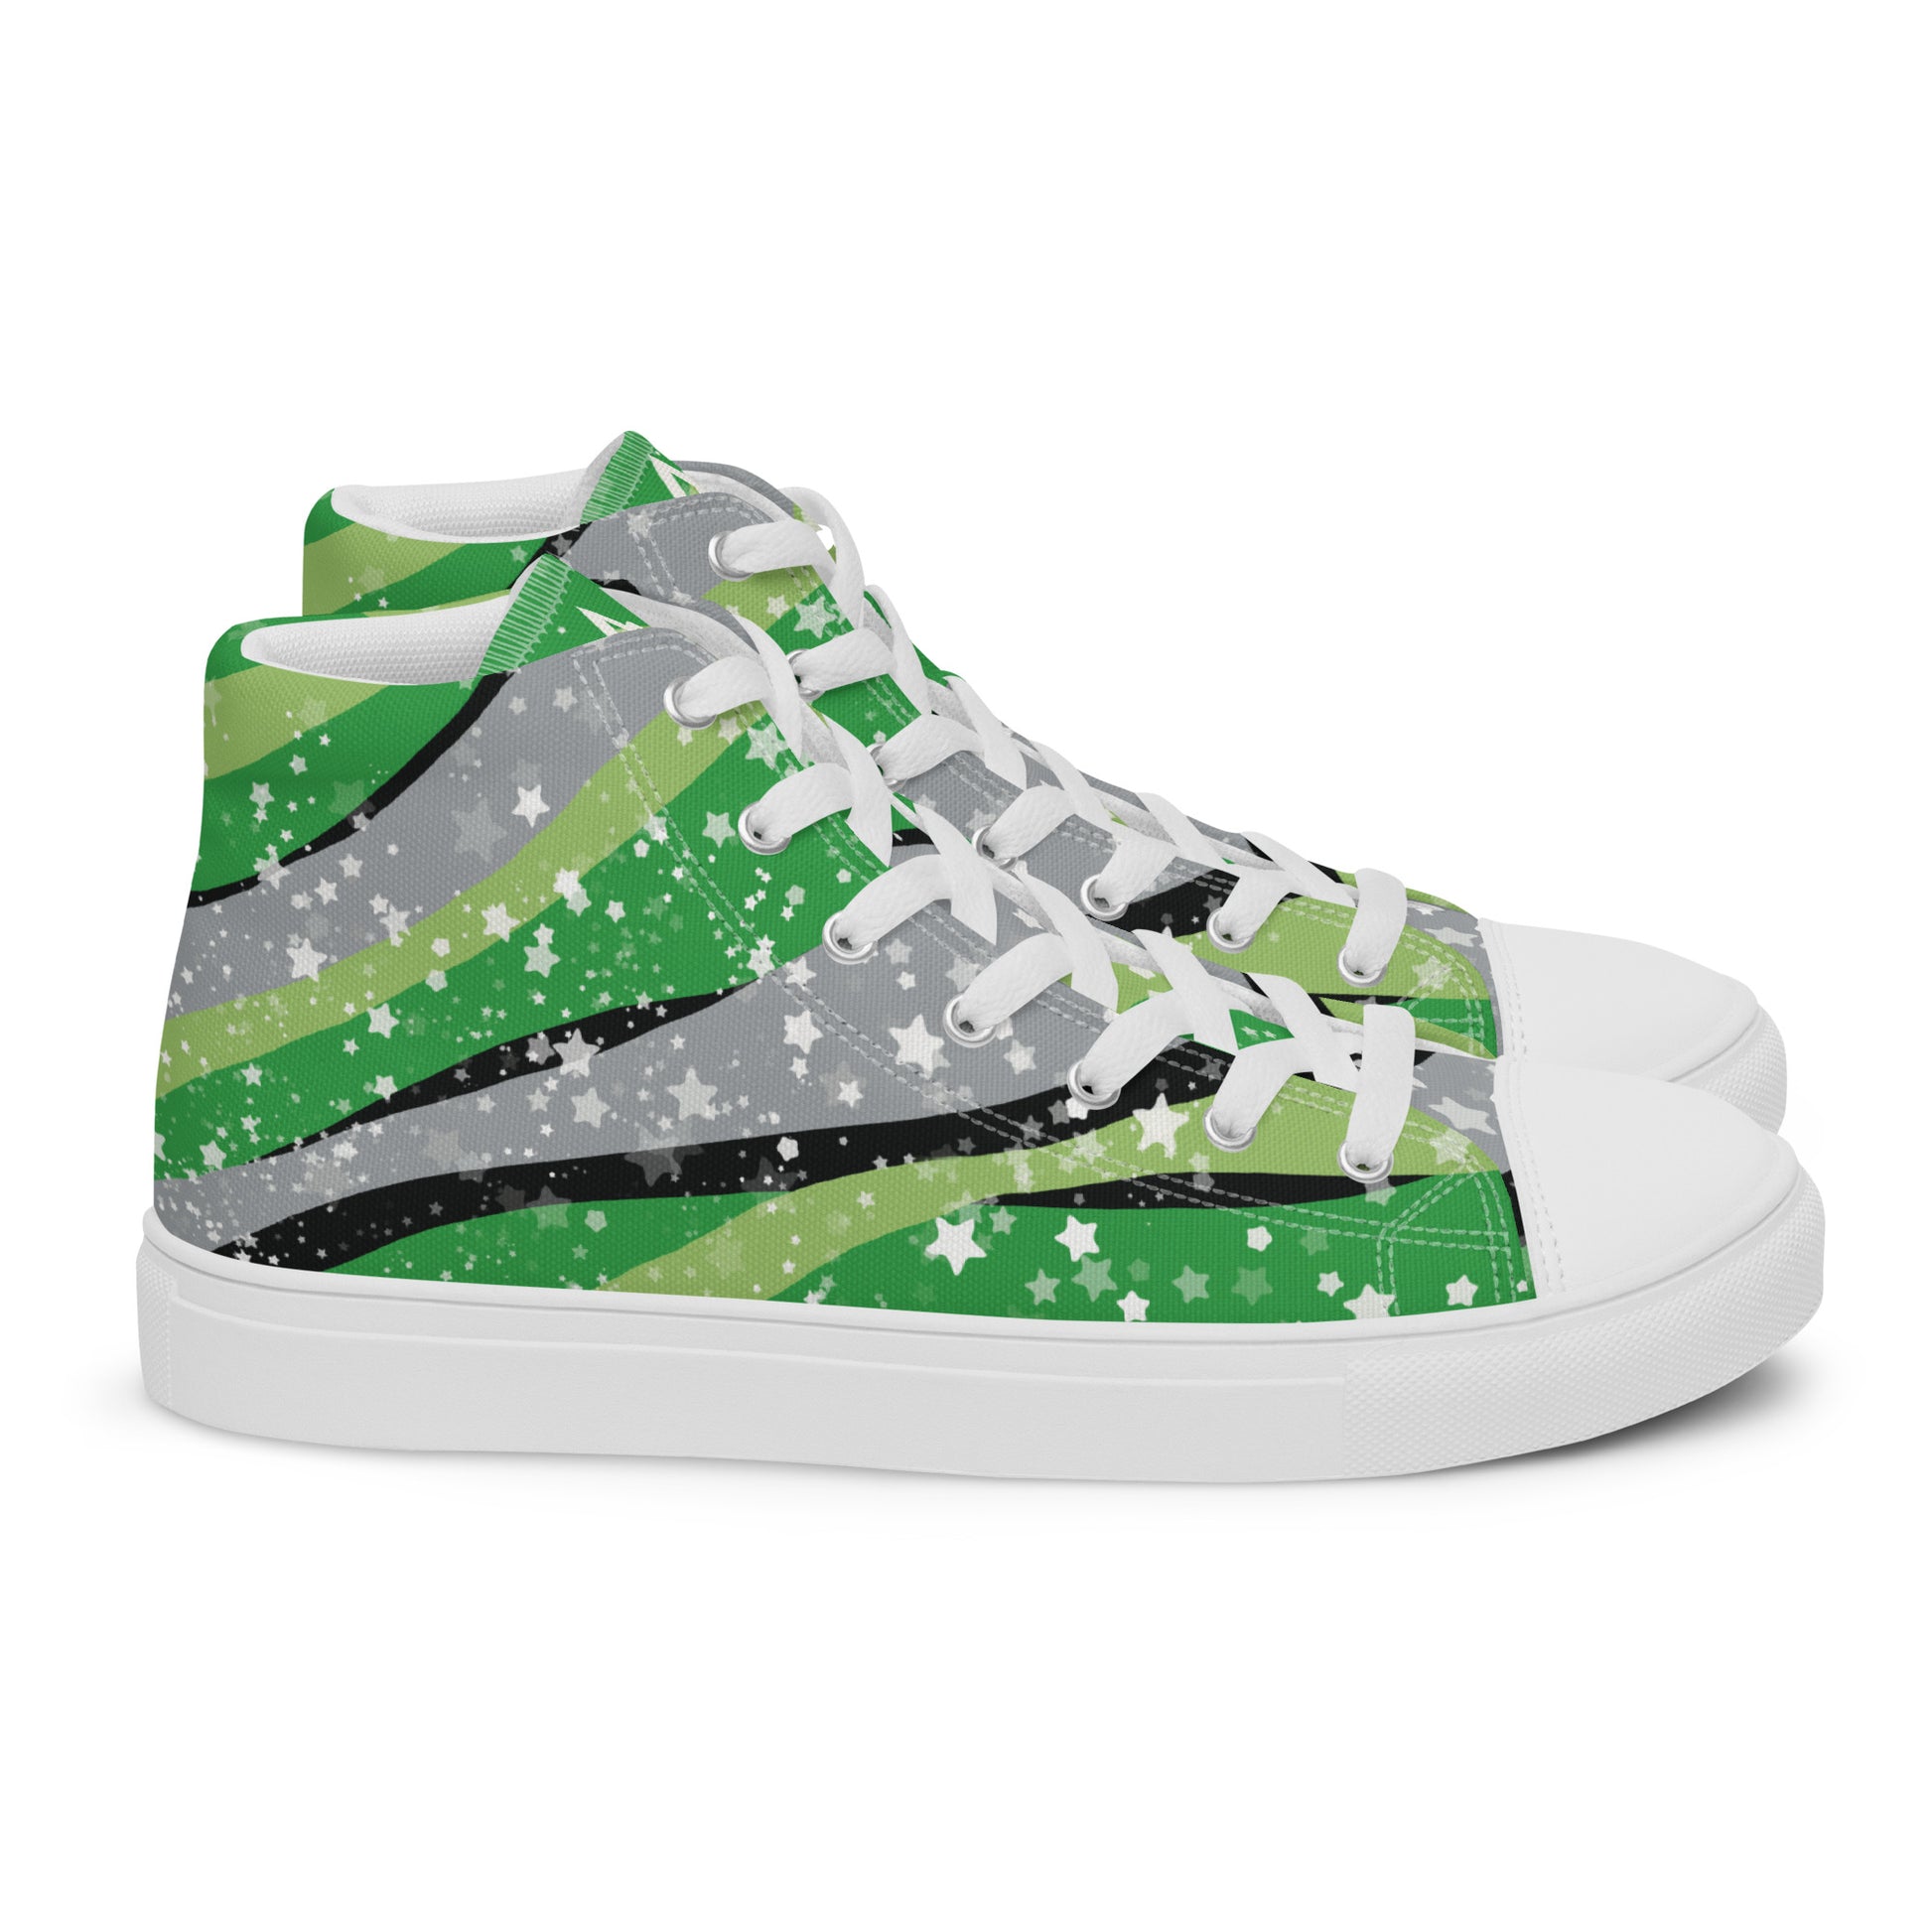 Right view: a pair of high-top shoes with ribbons of the greens, grey, and black of the aromantic pride flag coming from the heel and expanding towards the laces with an explosion of stars over it, white accents, and the Aras Sivad Studio logo in white on the tongue.